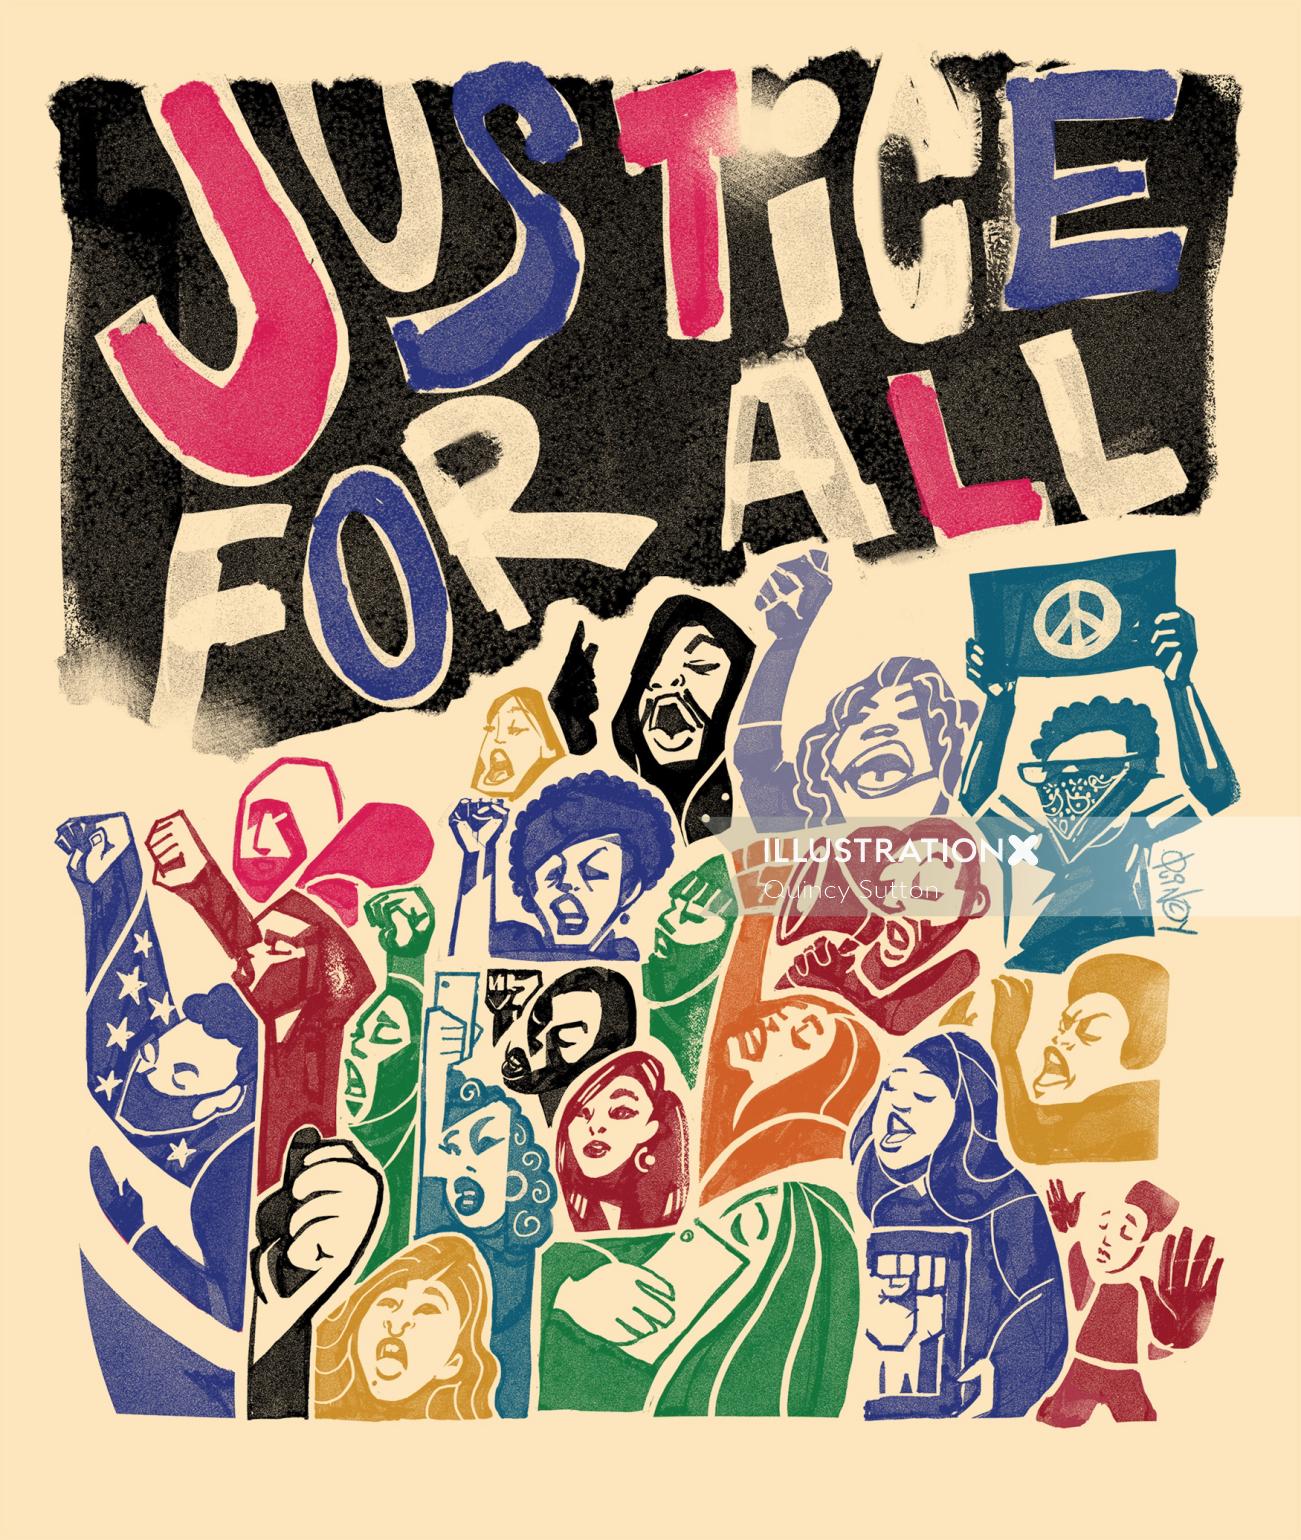 Lettering Justice for all
